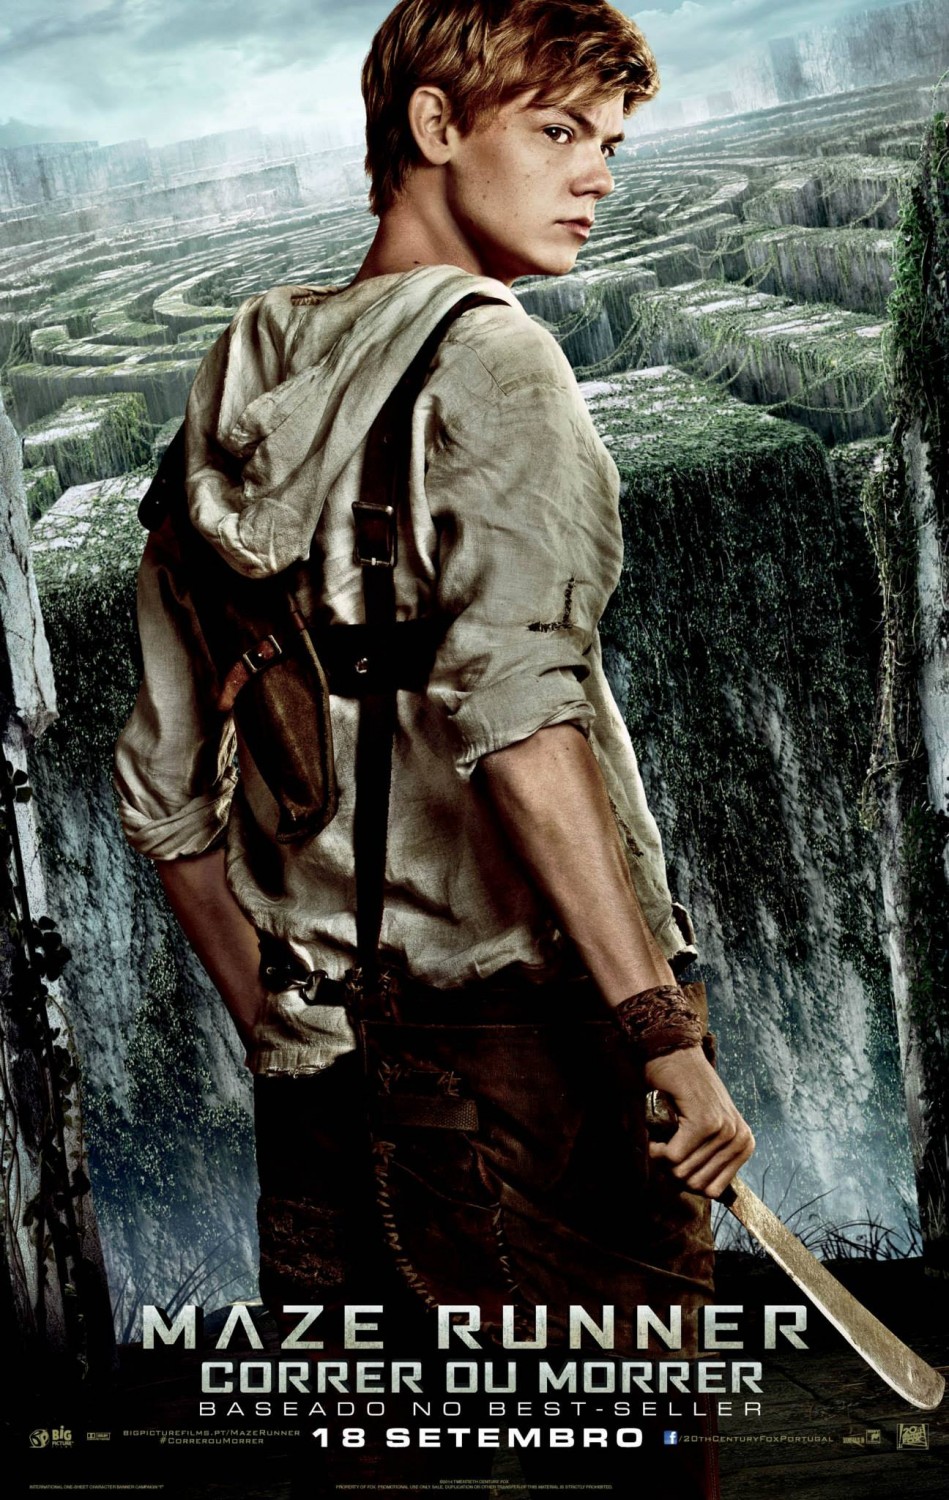 The Maze Runner (#1 of 24): Extra Large Movie Poster Image - IMP Awards